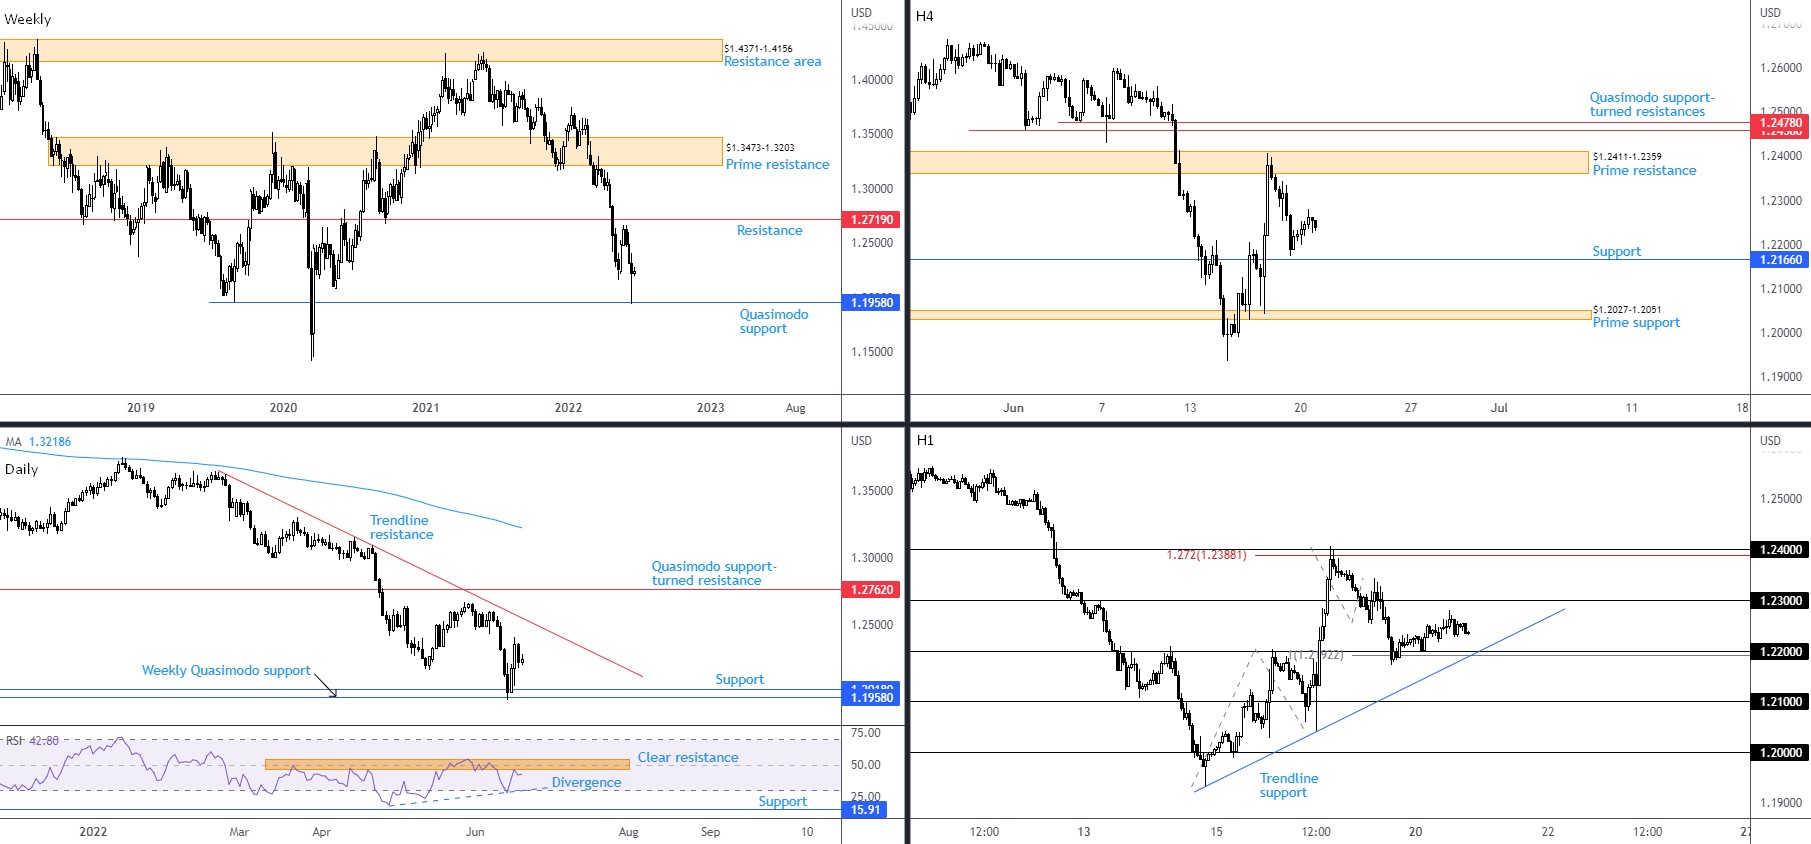 Technical View for June 21st 2022: $1.05 Echoing Potential Weakness on EUR/USD; $1.04 Eyed, FP Markets